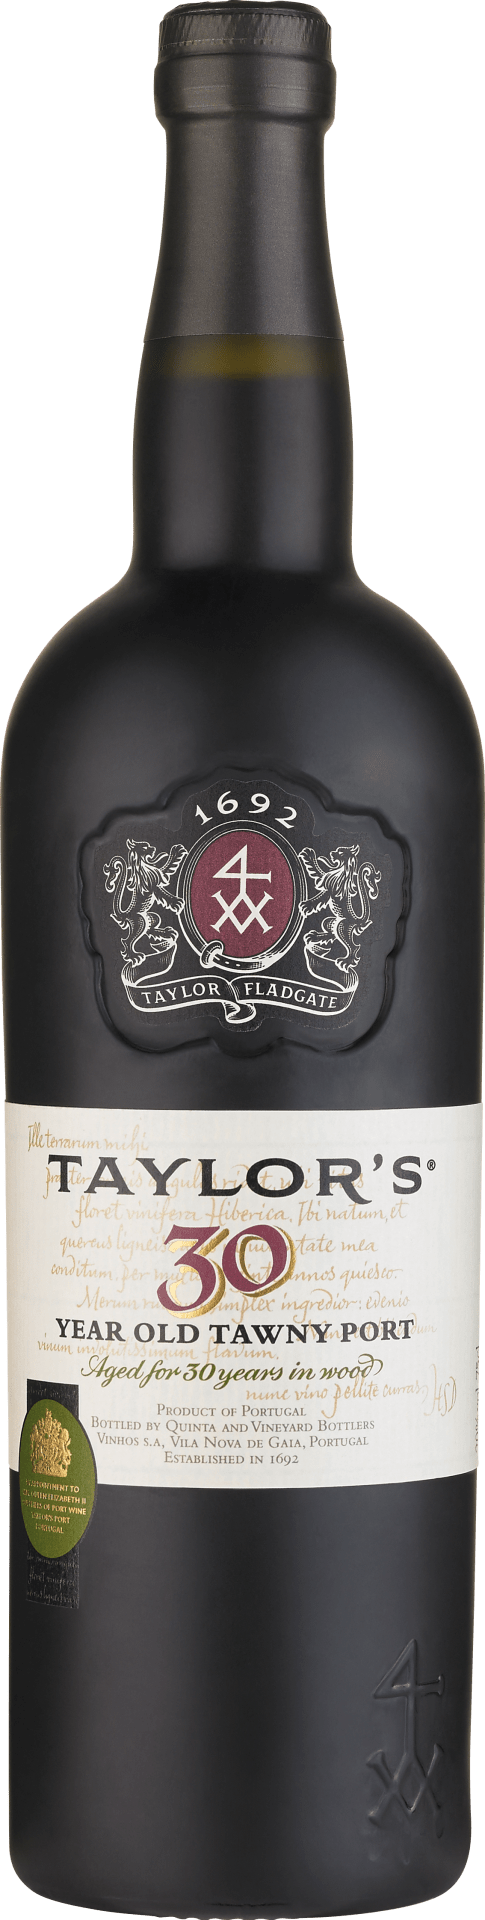 Taylor’s Port Tawny 30 Years Old - 0.75 l